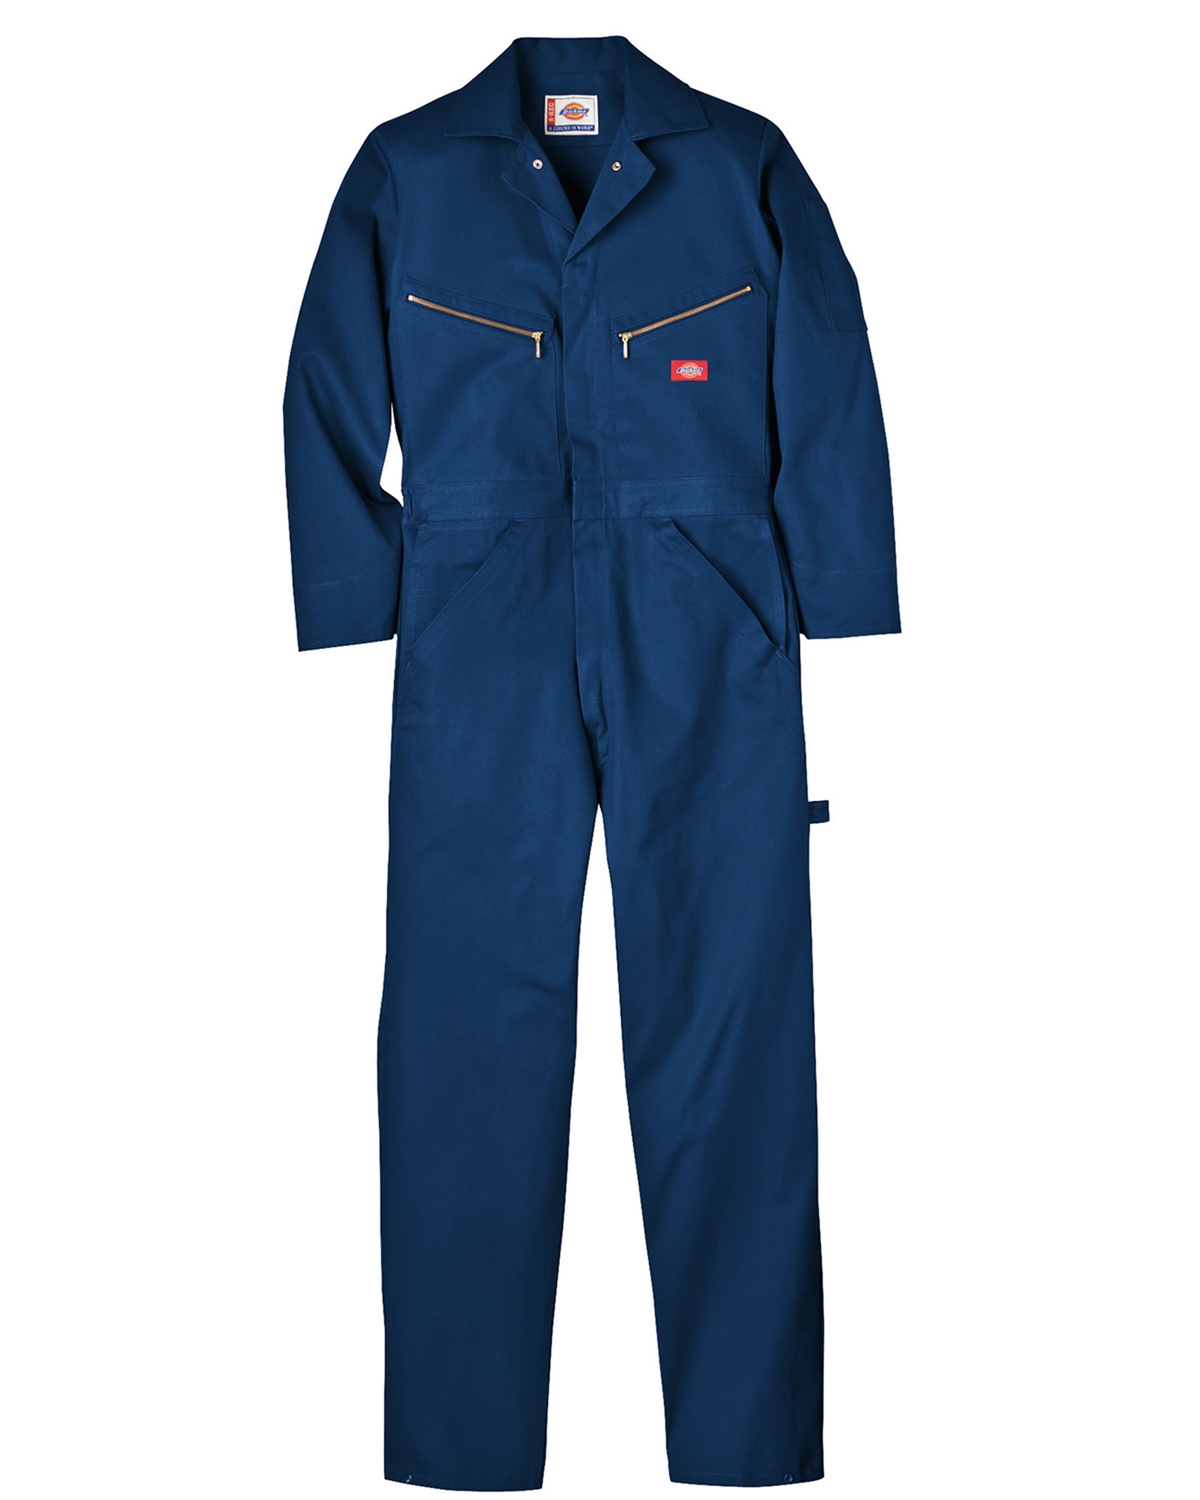 48700 Dickies 8.75 oz. Deluxe Coverall - Cotton